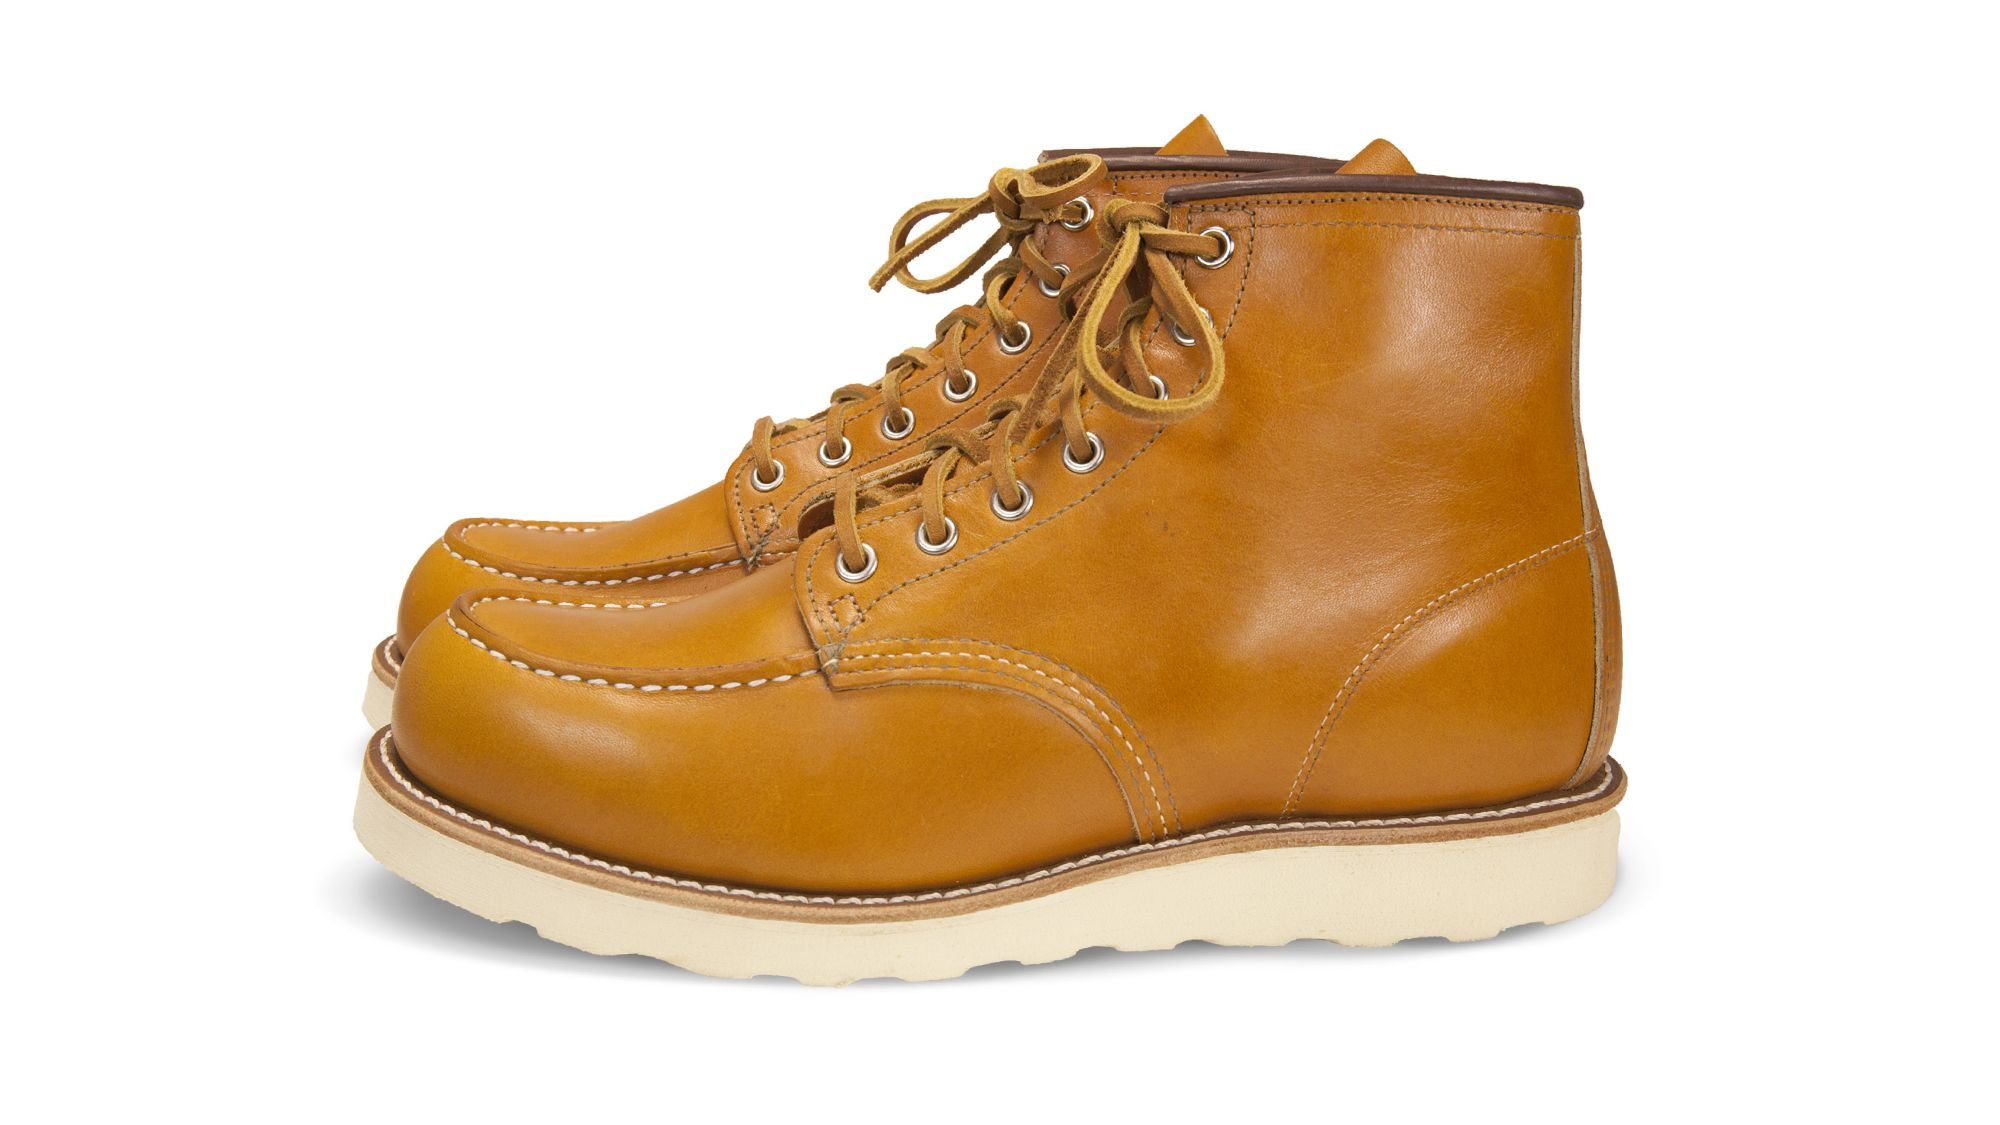 Shop the Moc Toe 9875 EE | Official Red Wing Shoes Online Store